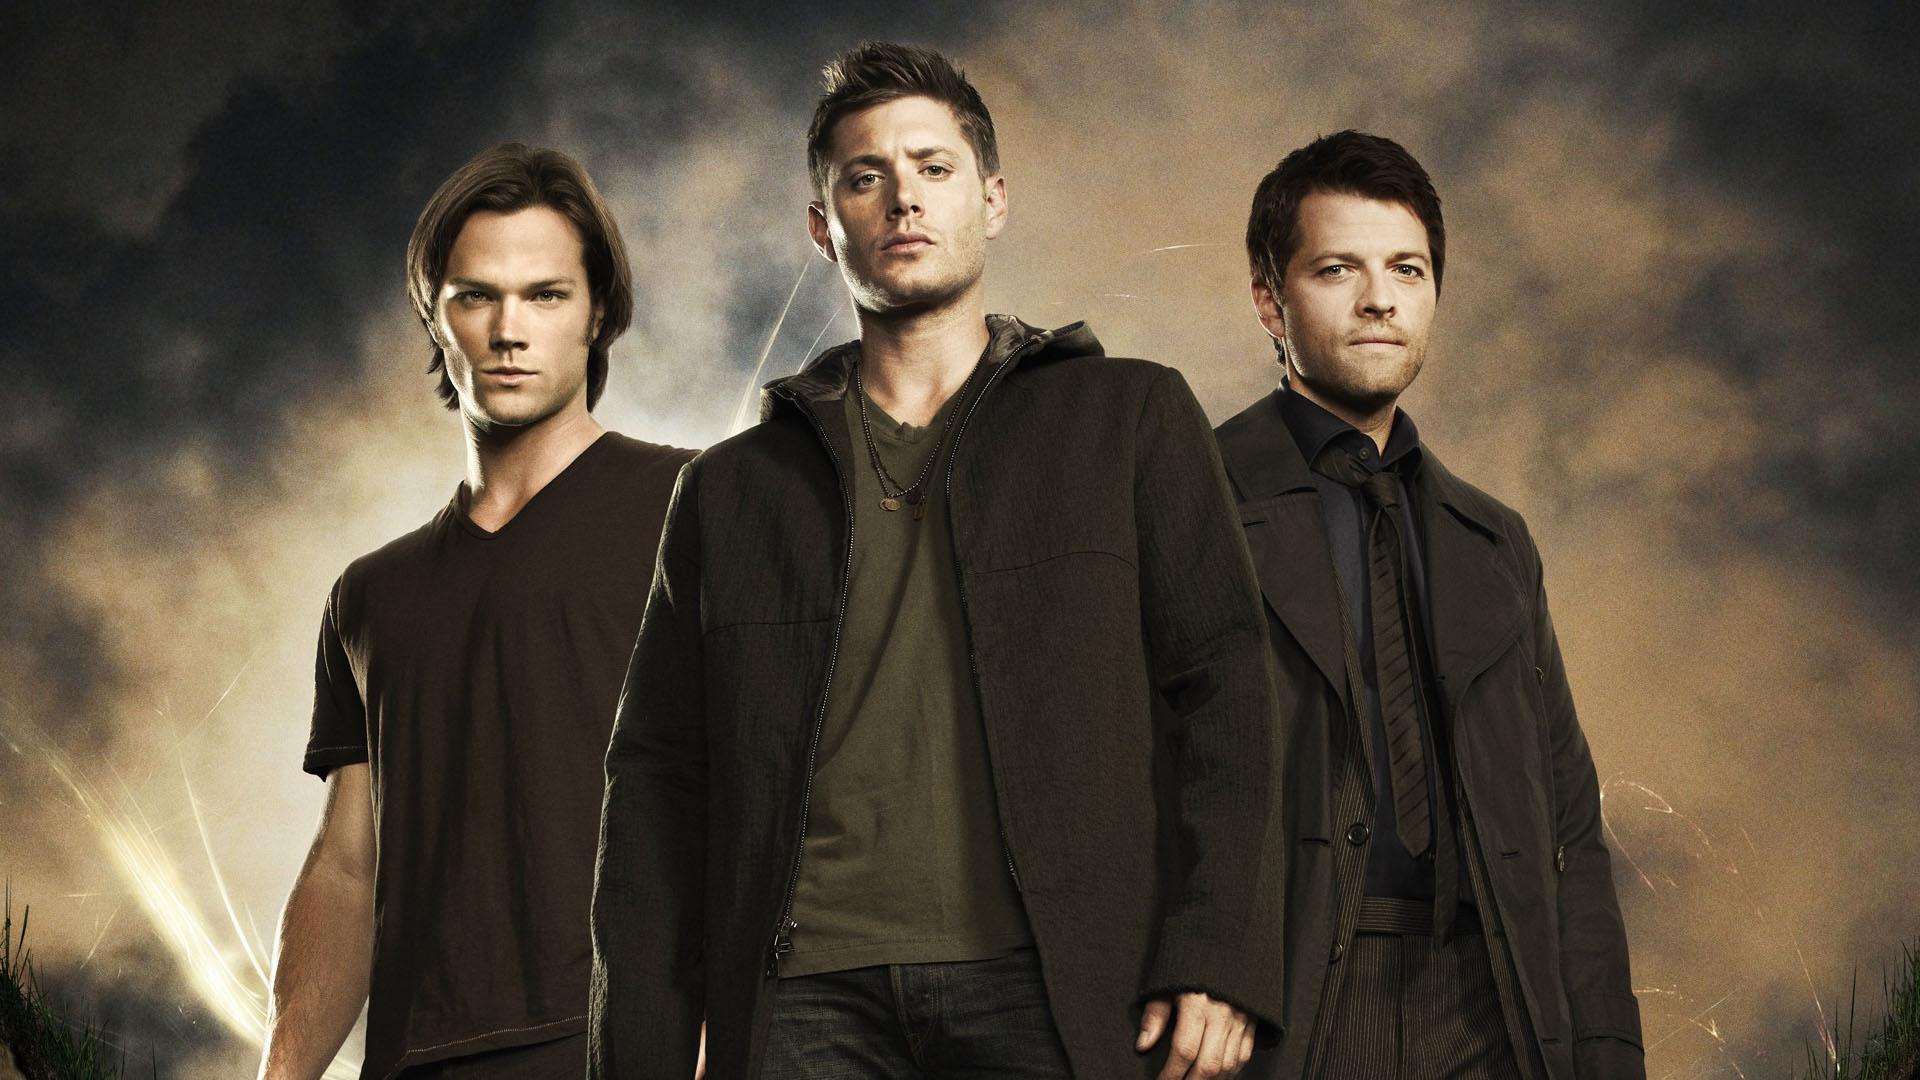 Supernatural Wallpaper High Resolution and Quality Download